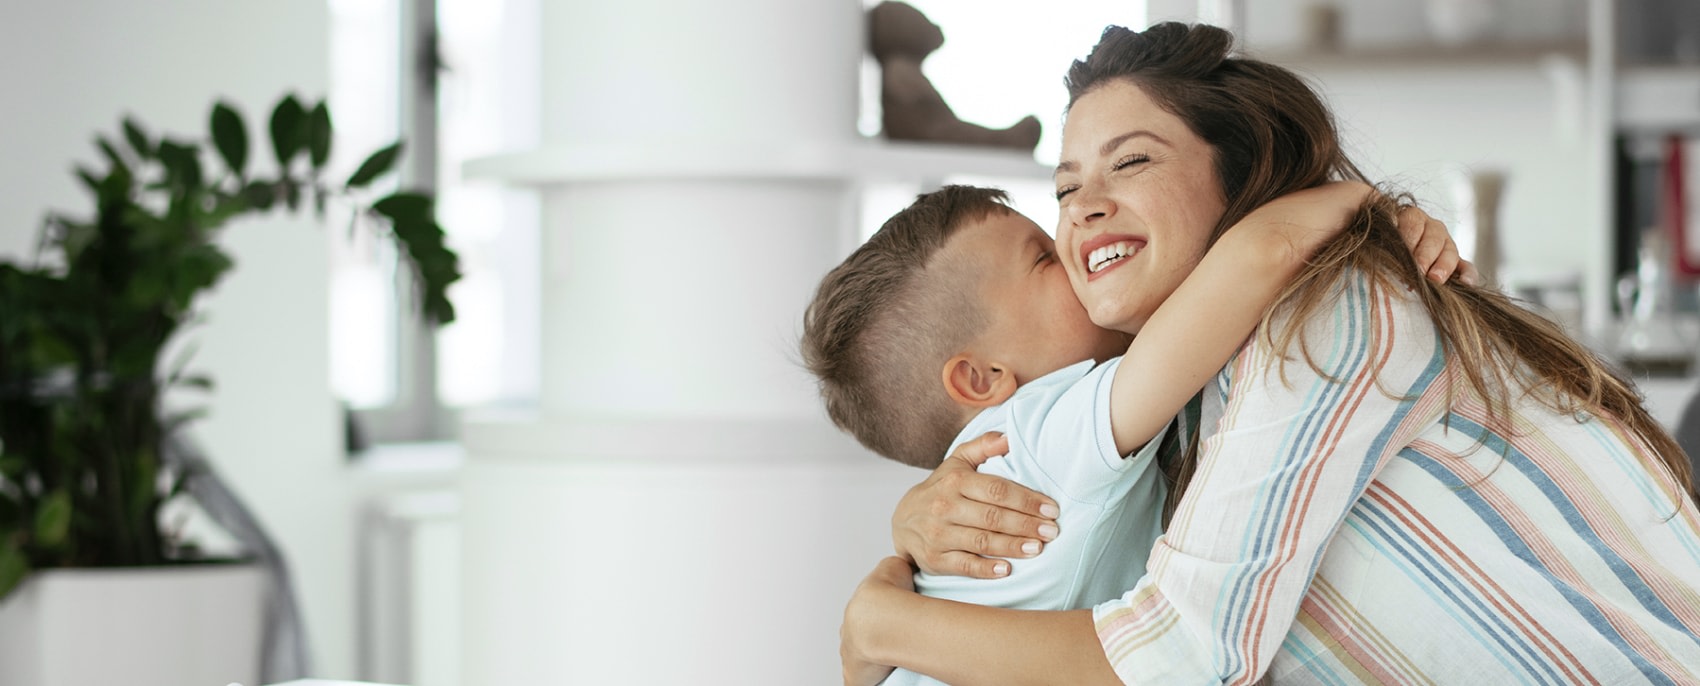 Your Family Dentists in North Vancouver, BC